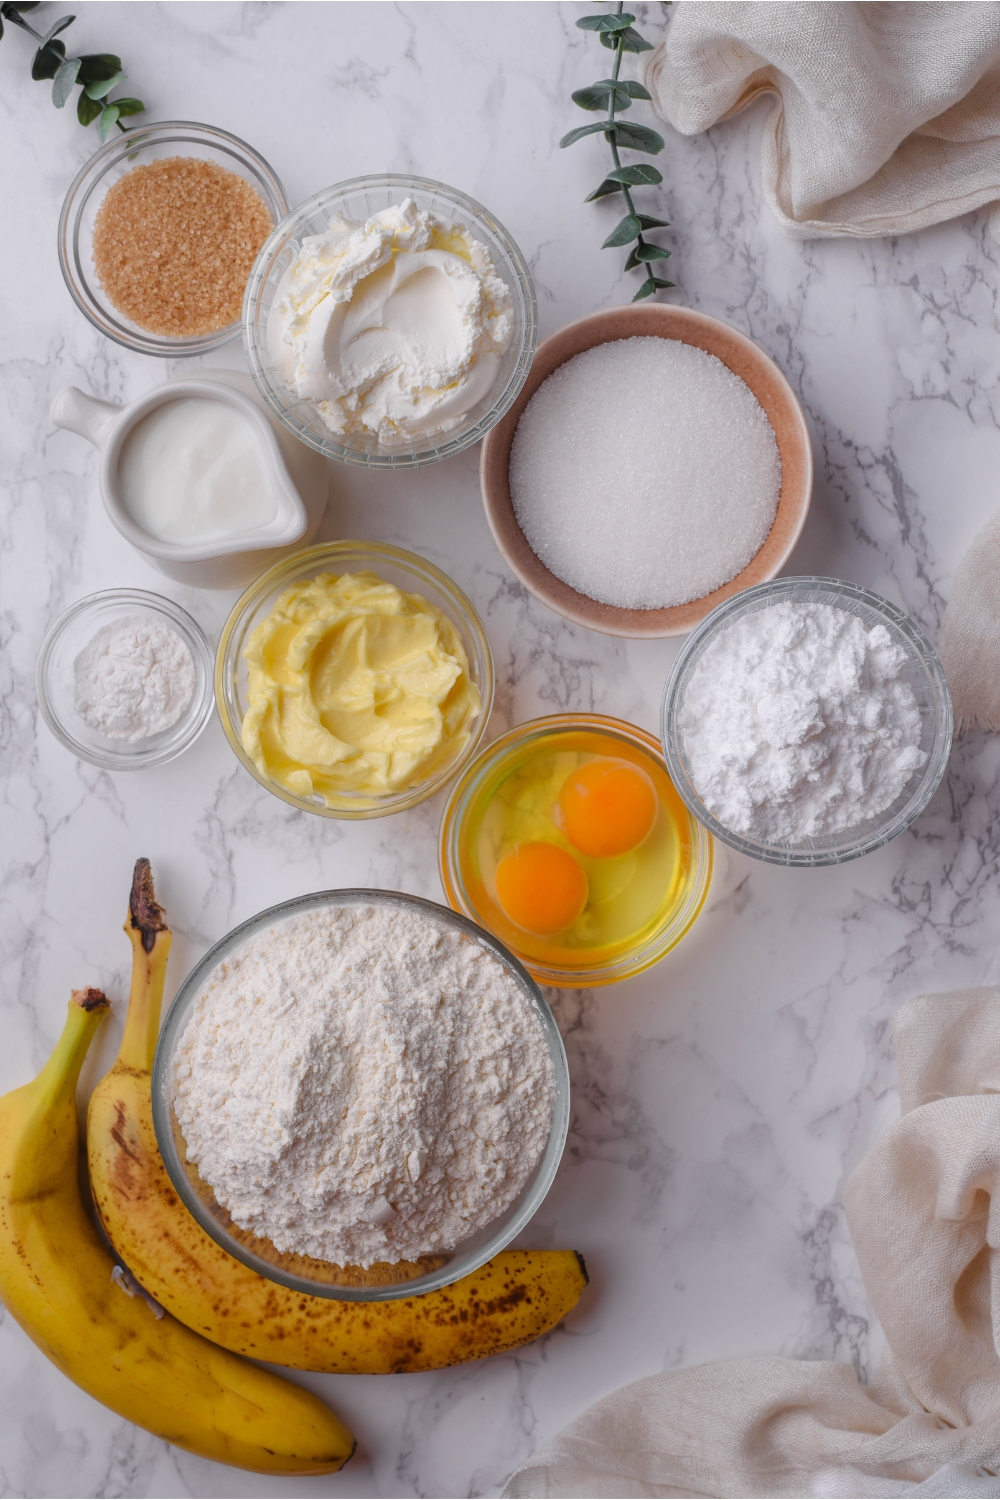 An assortment of ingredients including two bananas and bowls of cream cheese, flour, powdered sugar, white sugar, brown sugar, two eggs, butter, and a pitcher of milk.